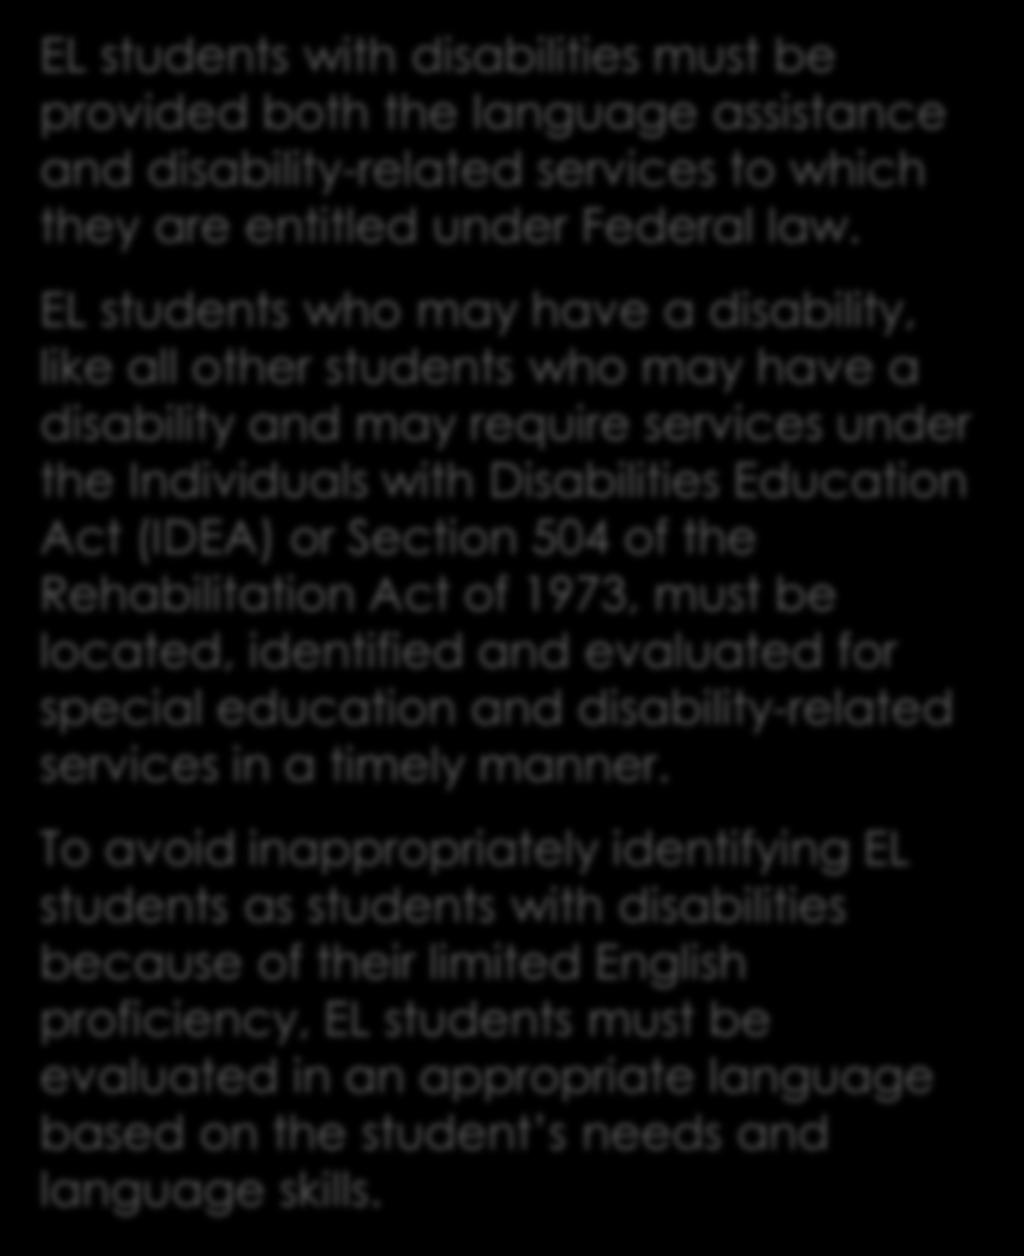 EL students who may have a disability, like all other students who may have a disability and may require services under the Individuals with Disabilities Education Act (IDEA) or Section 504 of the